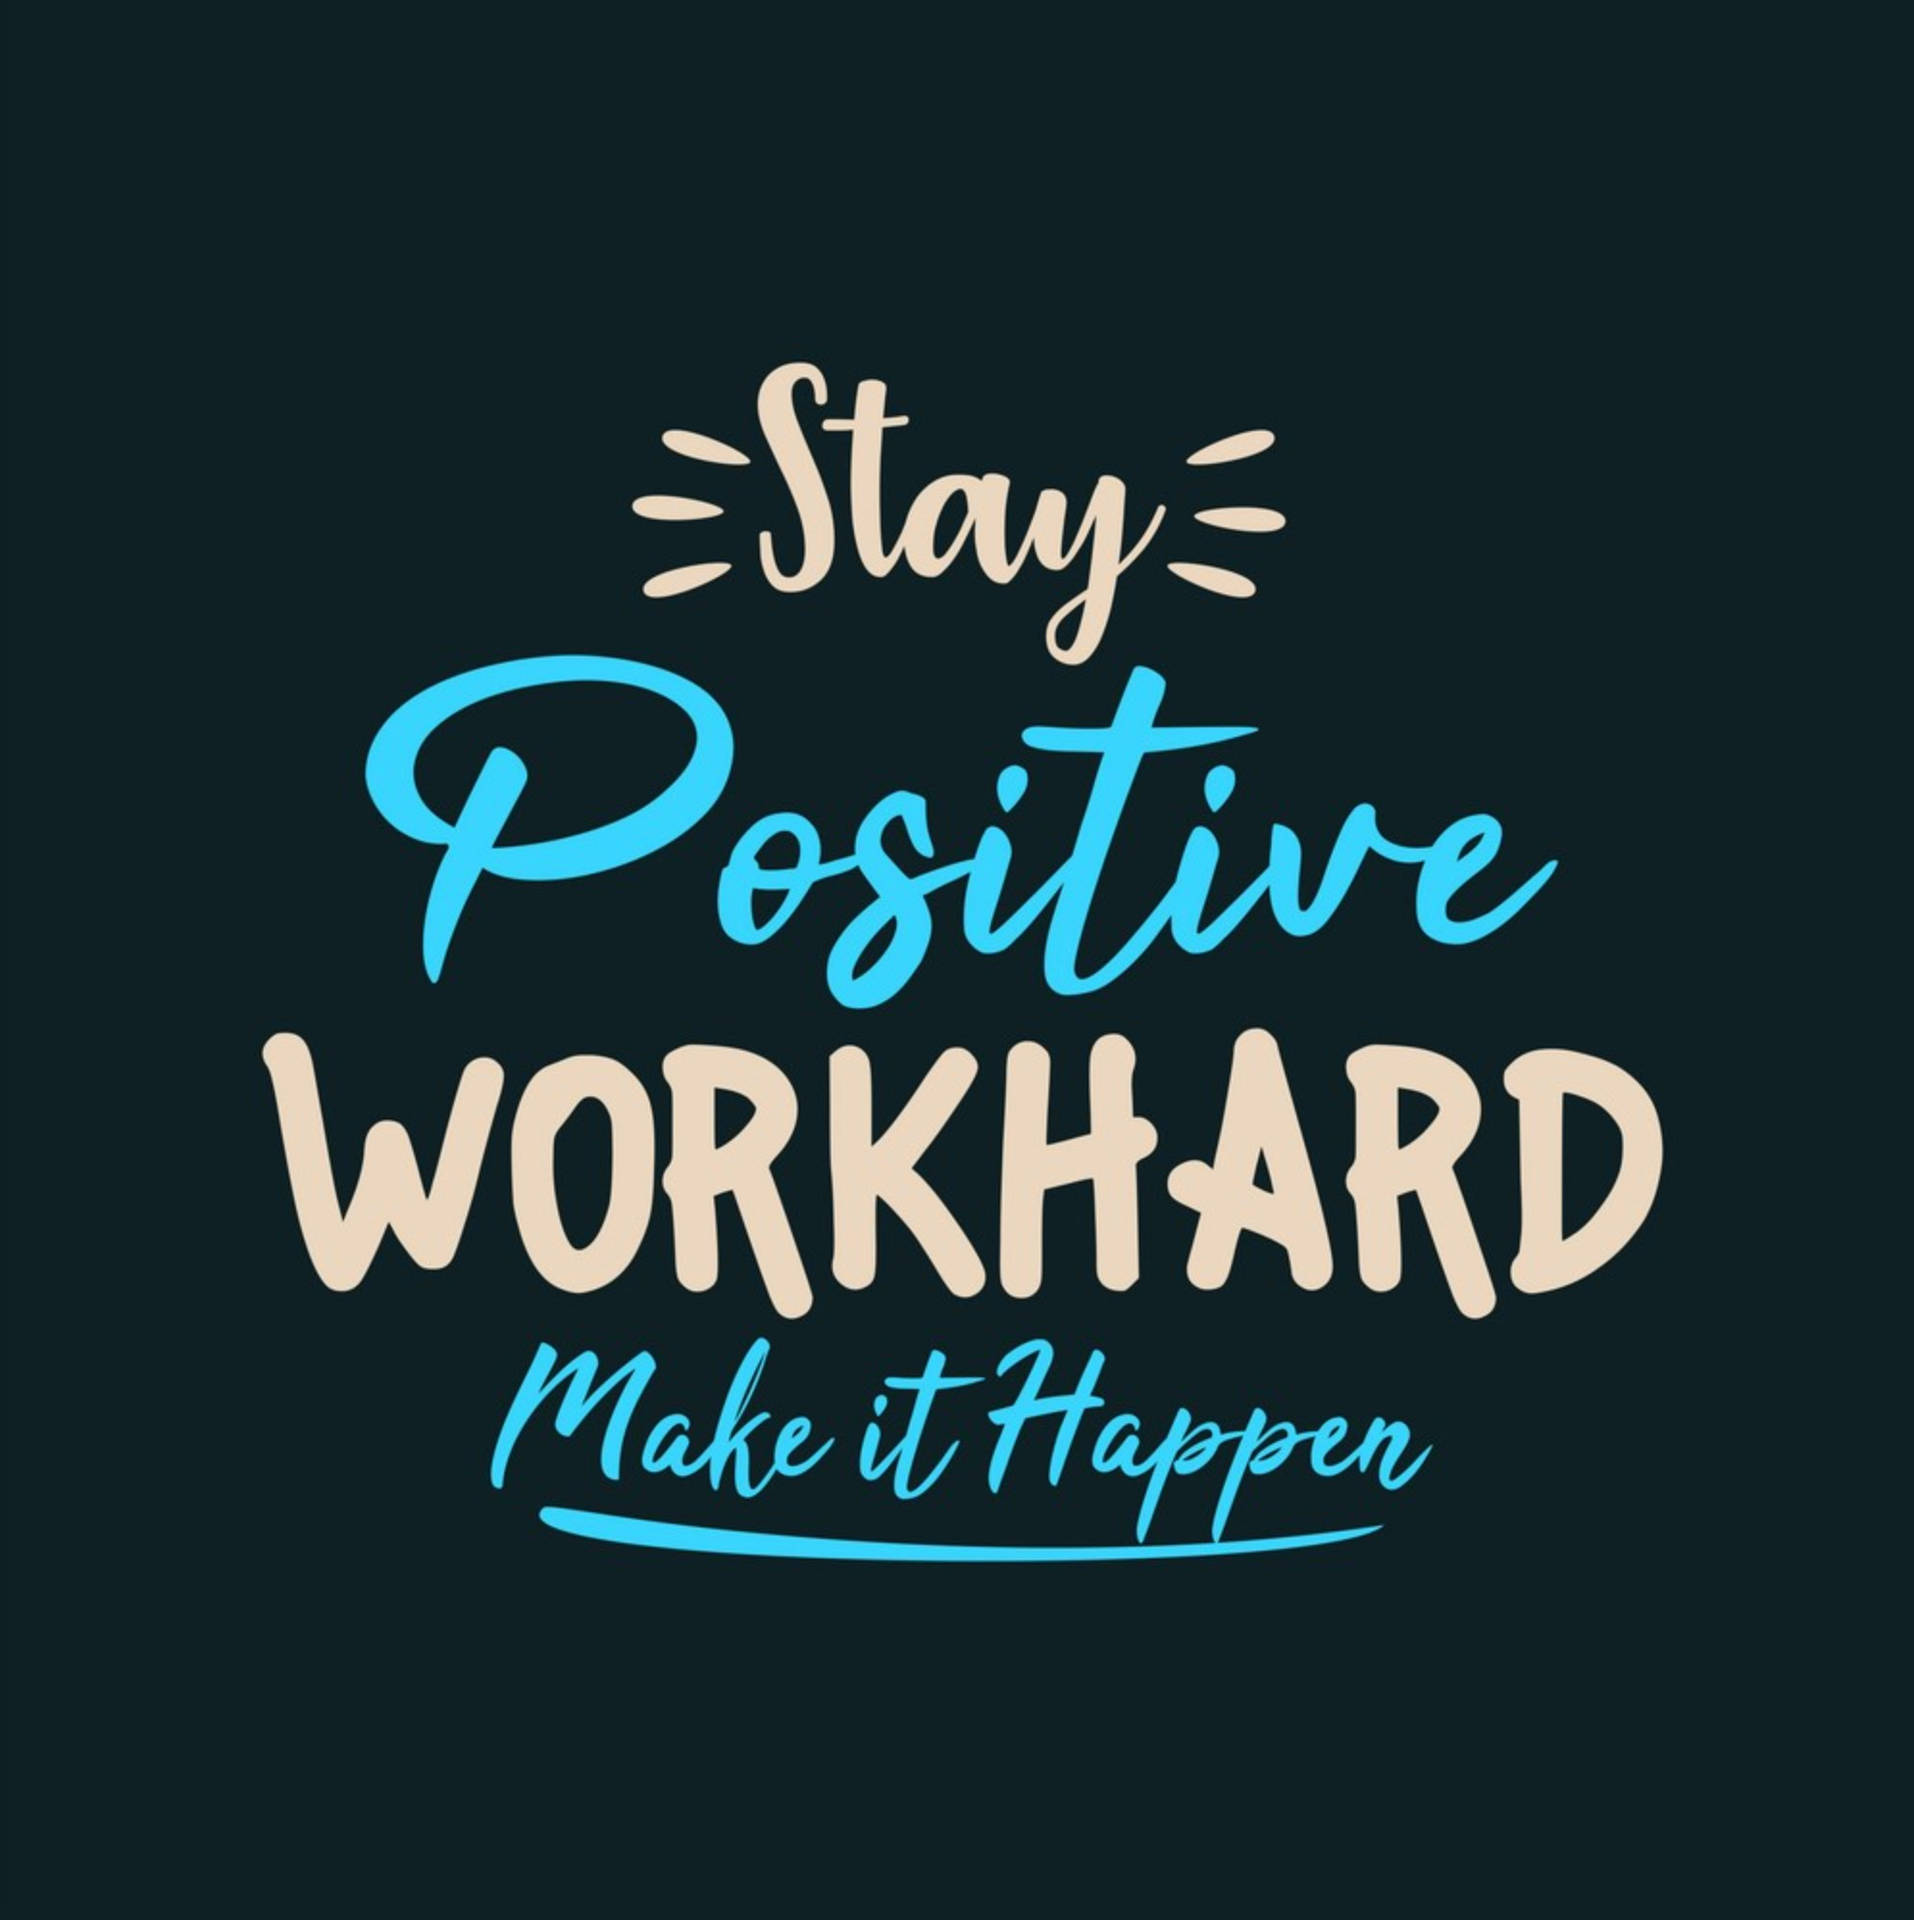 300+] Positive Quotes Wallpapers | Wallpapers.com